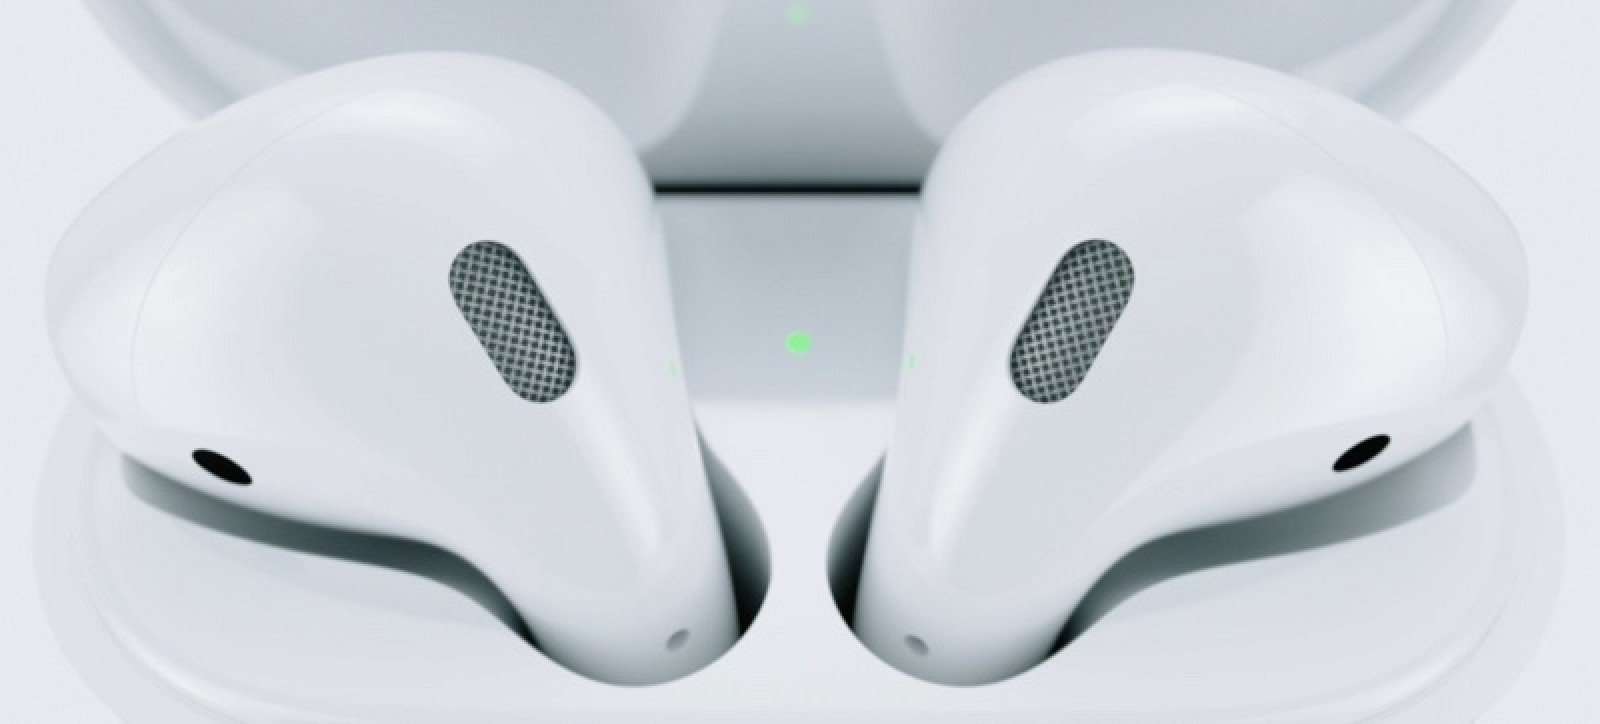 image for Report: 'AirPods Pro' to Launch End of October with New Design, New Noise-Canceling Feature and $260 Price Tag